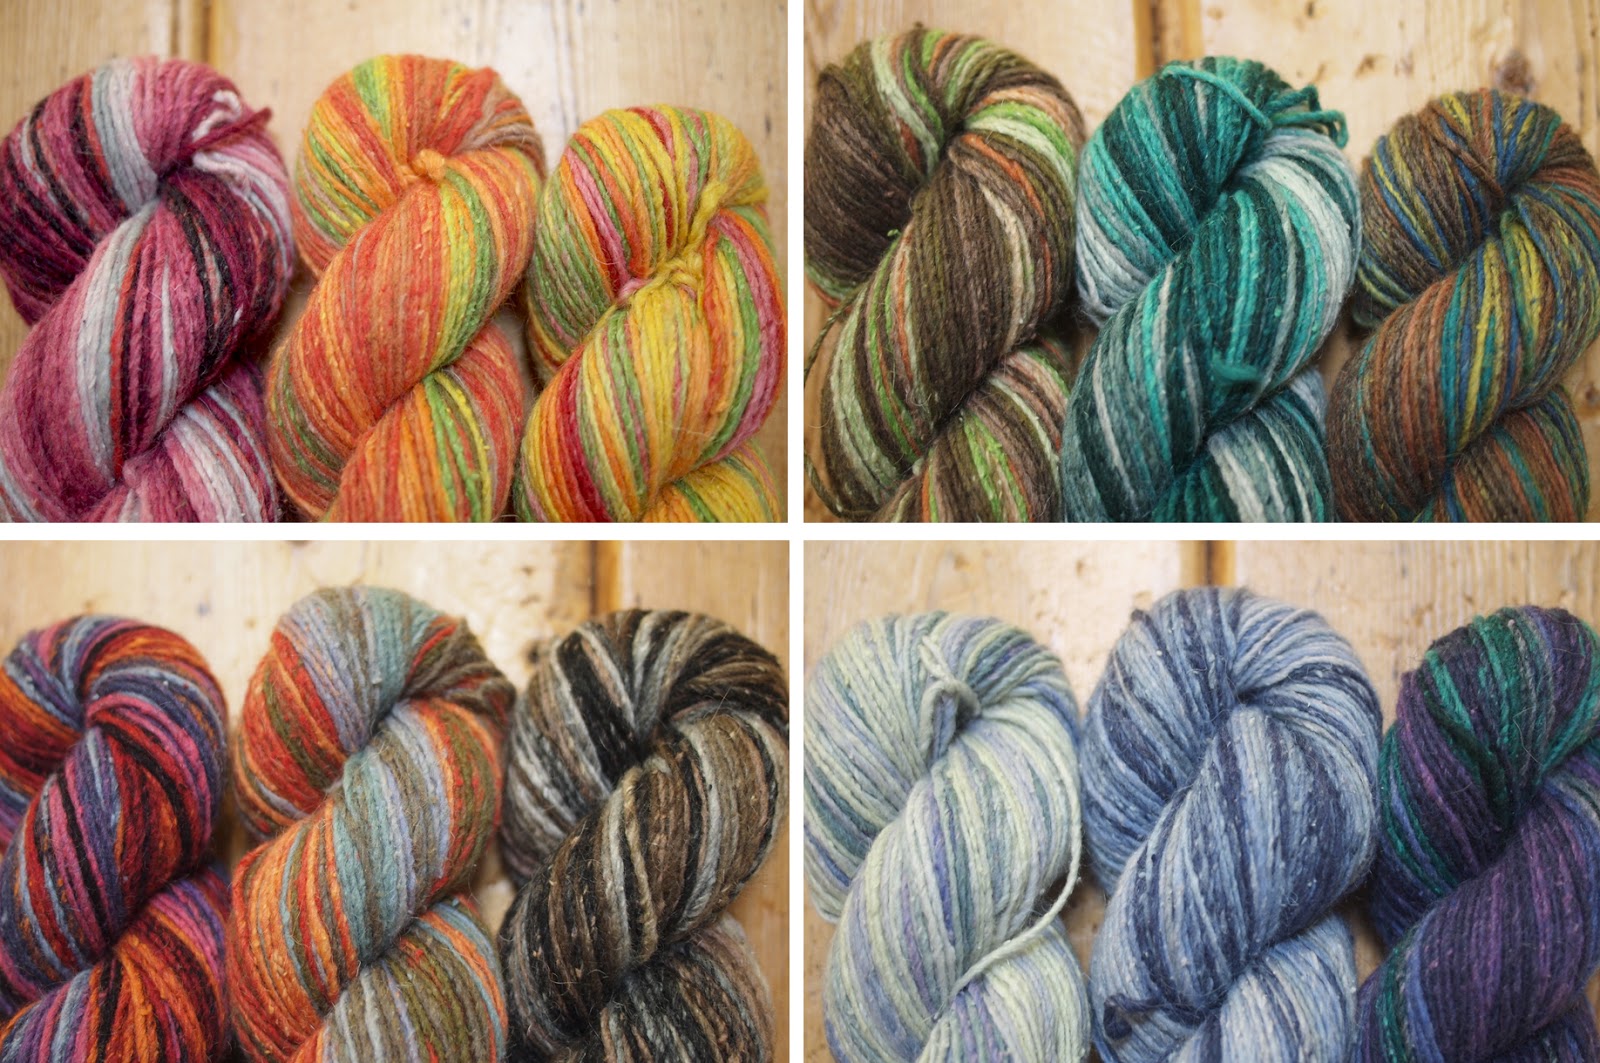 Pure Wool: A Guide to Using Single-Breed Yarns